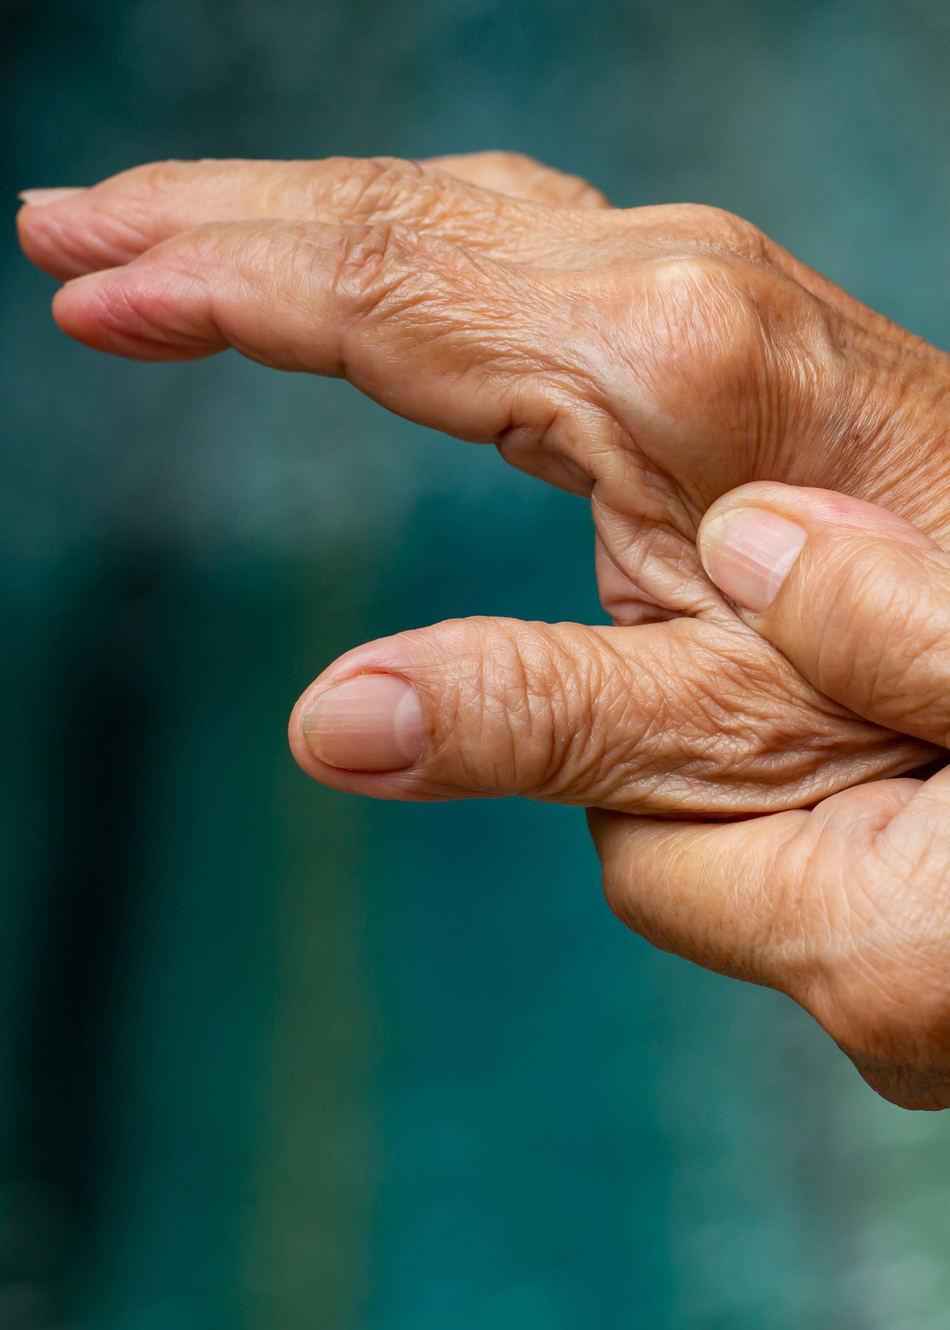 What Treatment Options are Available for Thumb Arthritis?